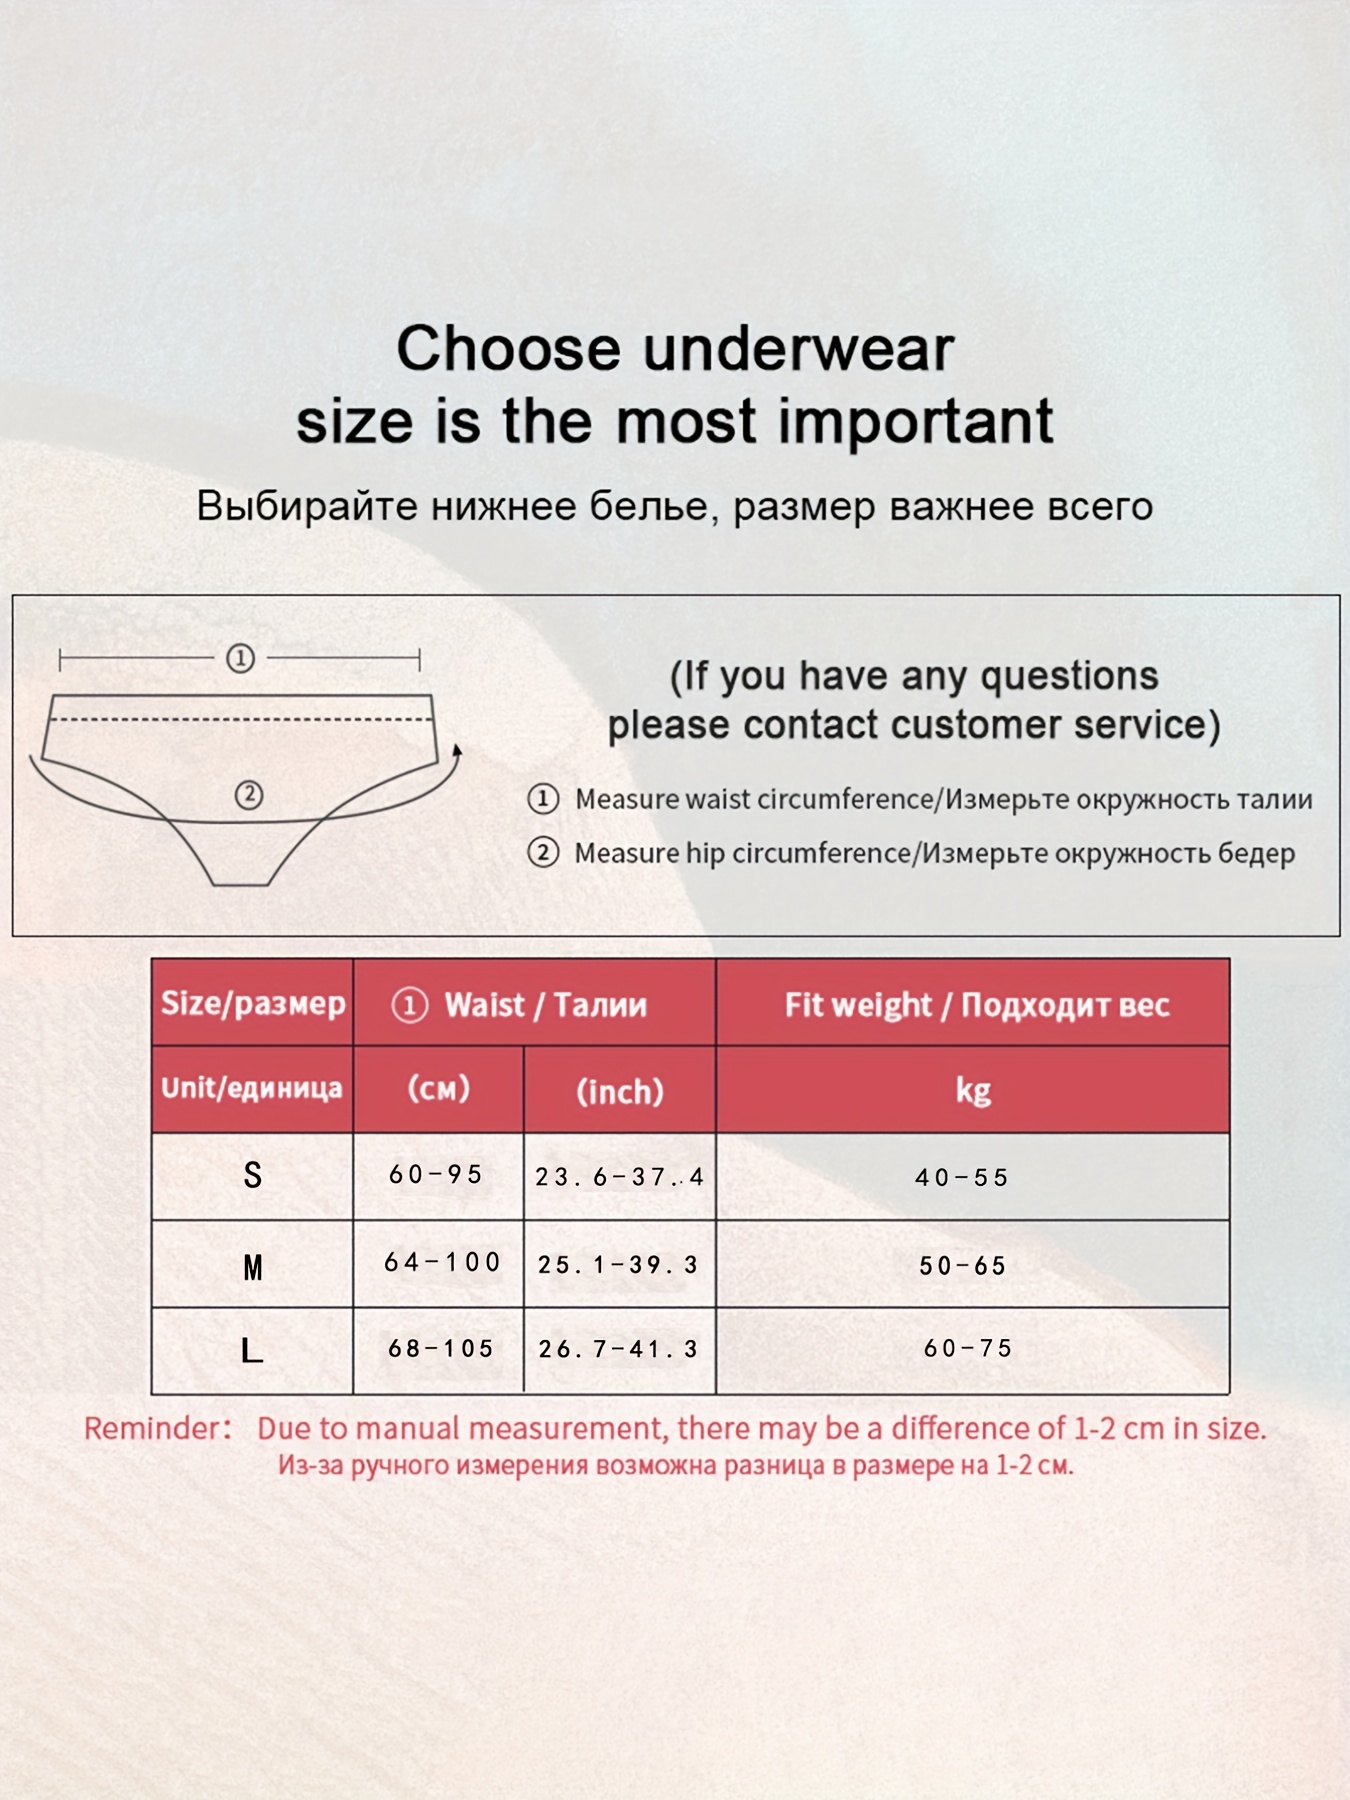 Lingerie Sizing, Comfortable Intimates